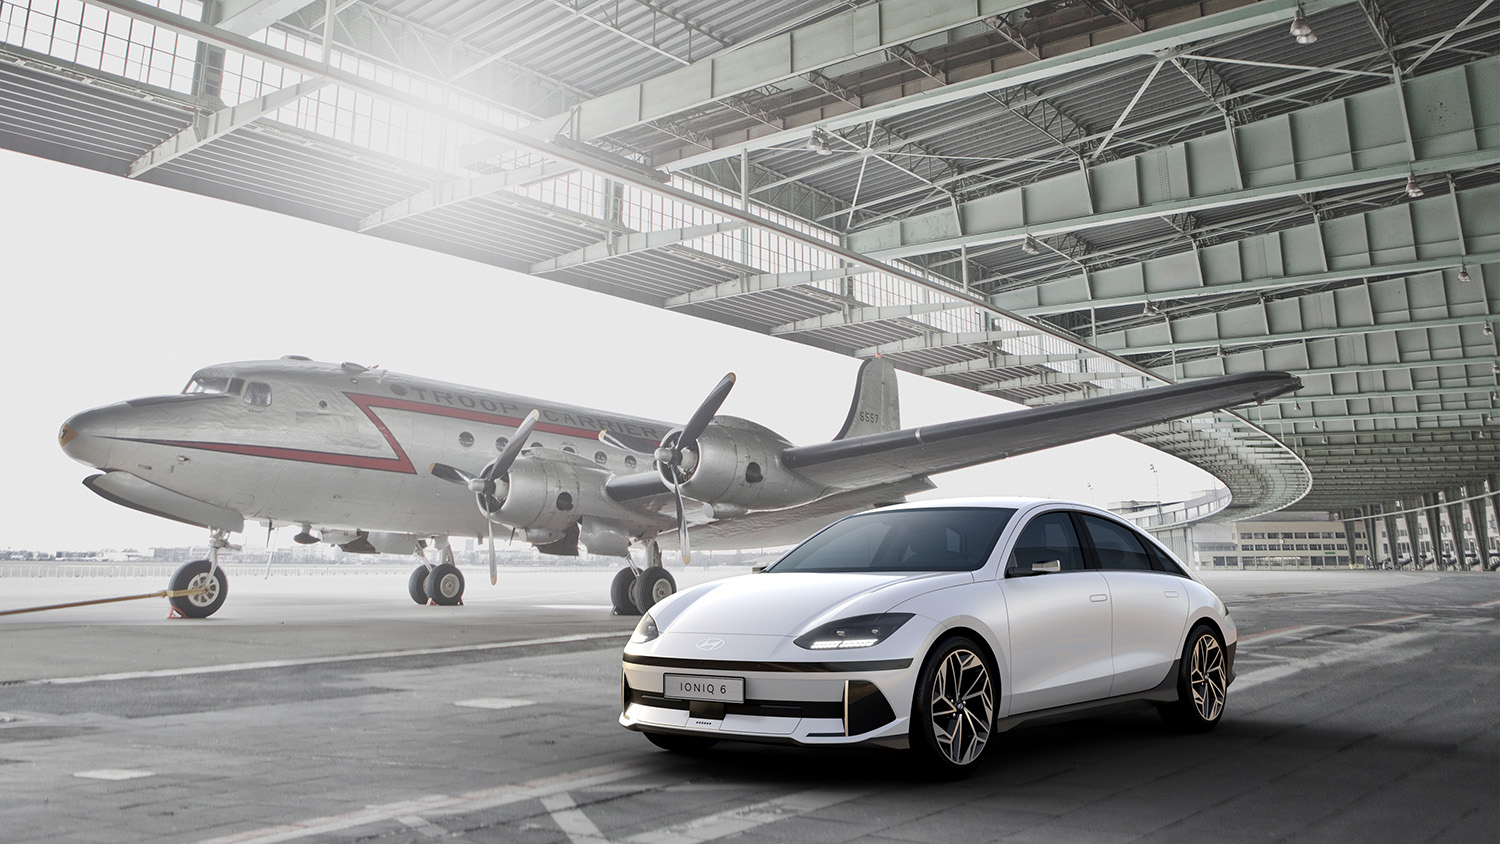 Hyundai Ioniq 6 EV parked in front of airplane in a hanger for design reveal photo